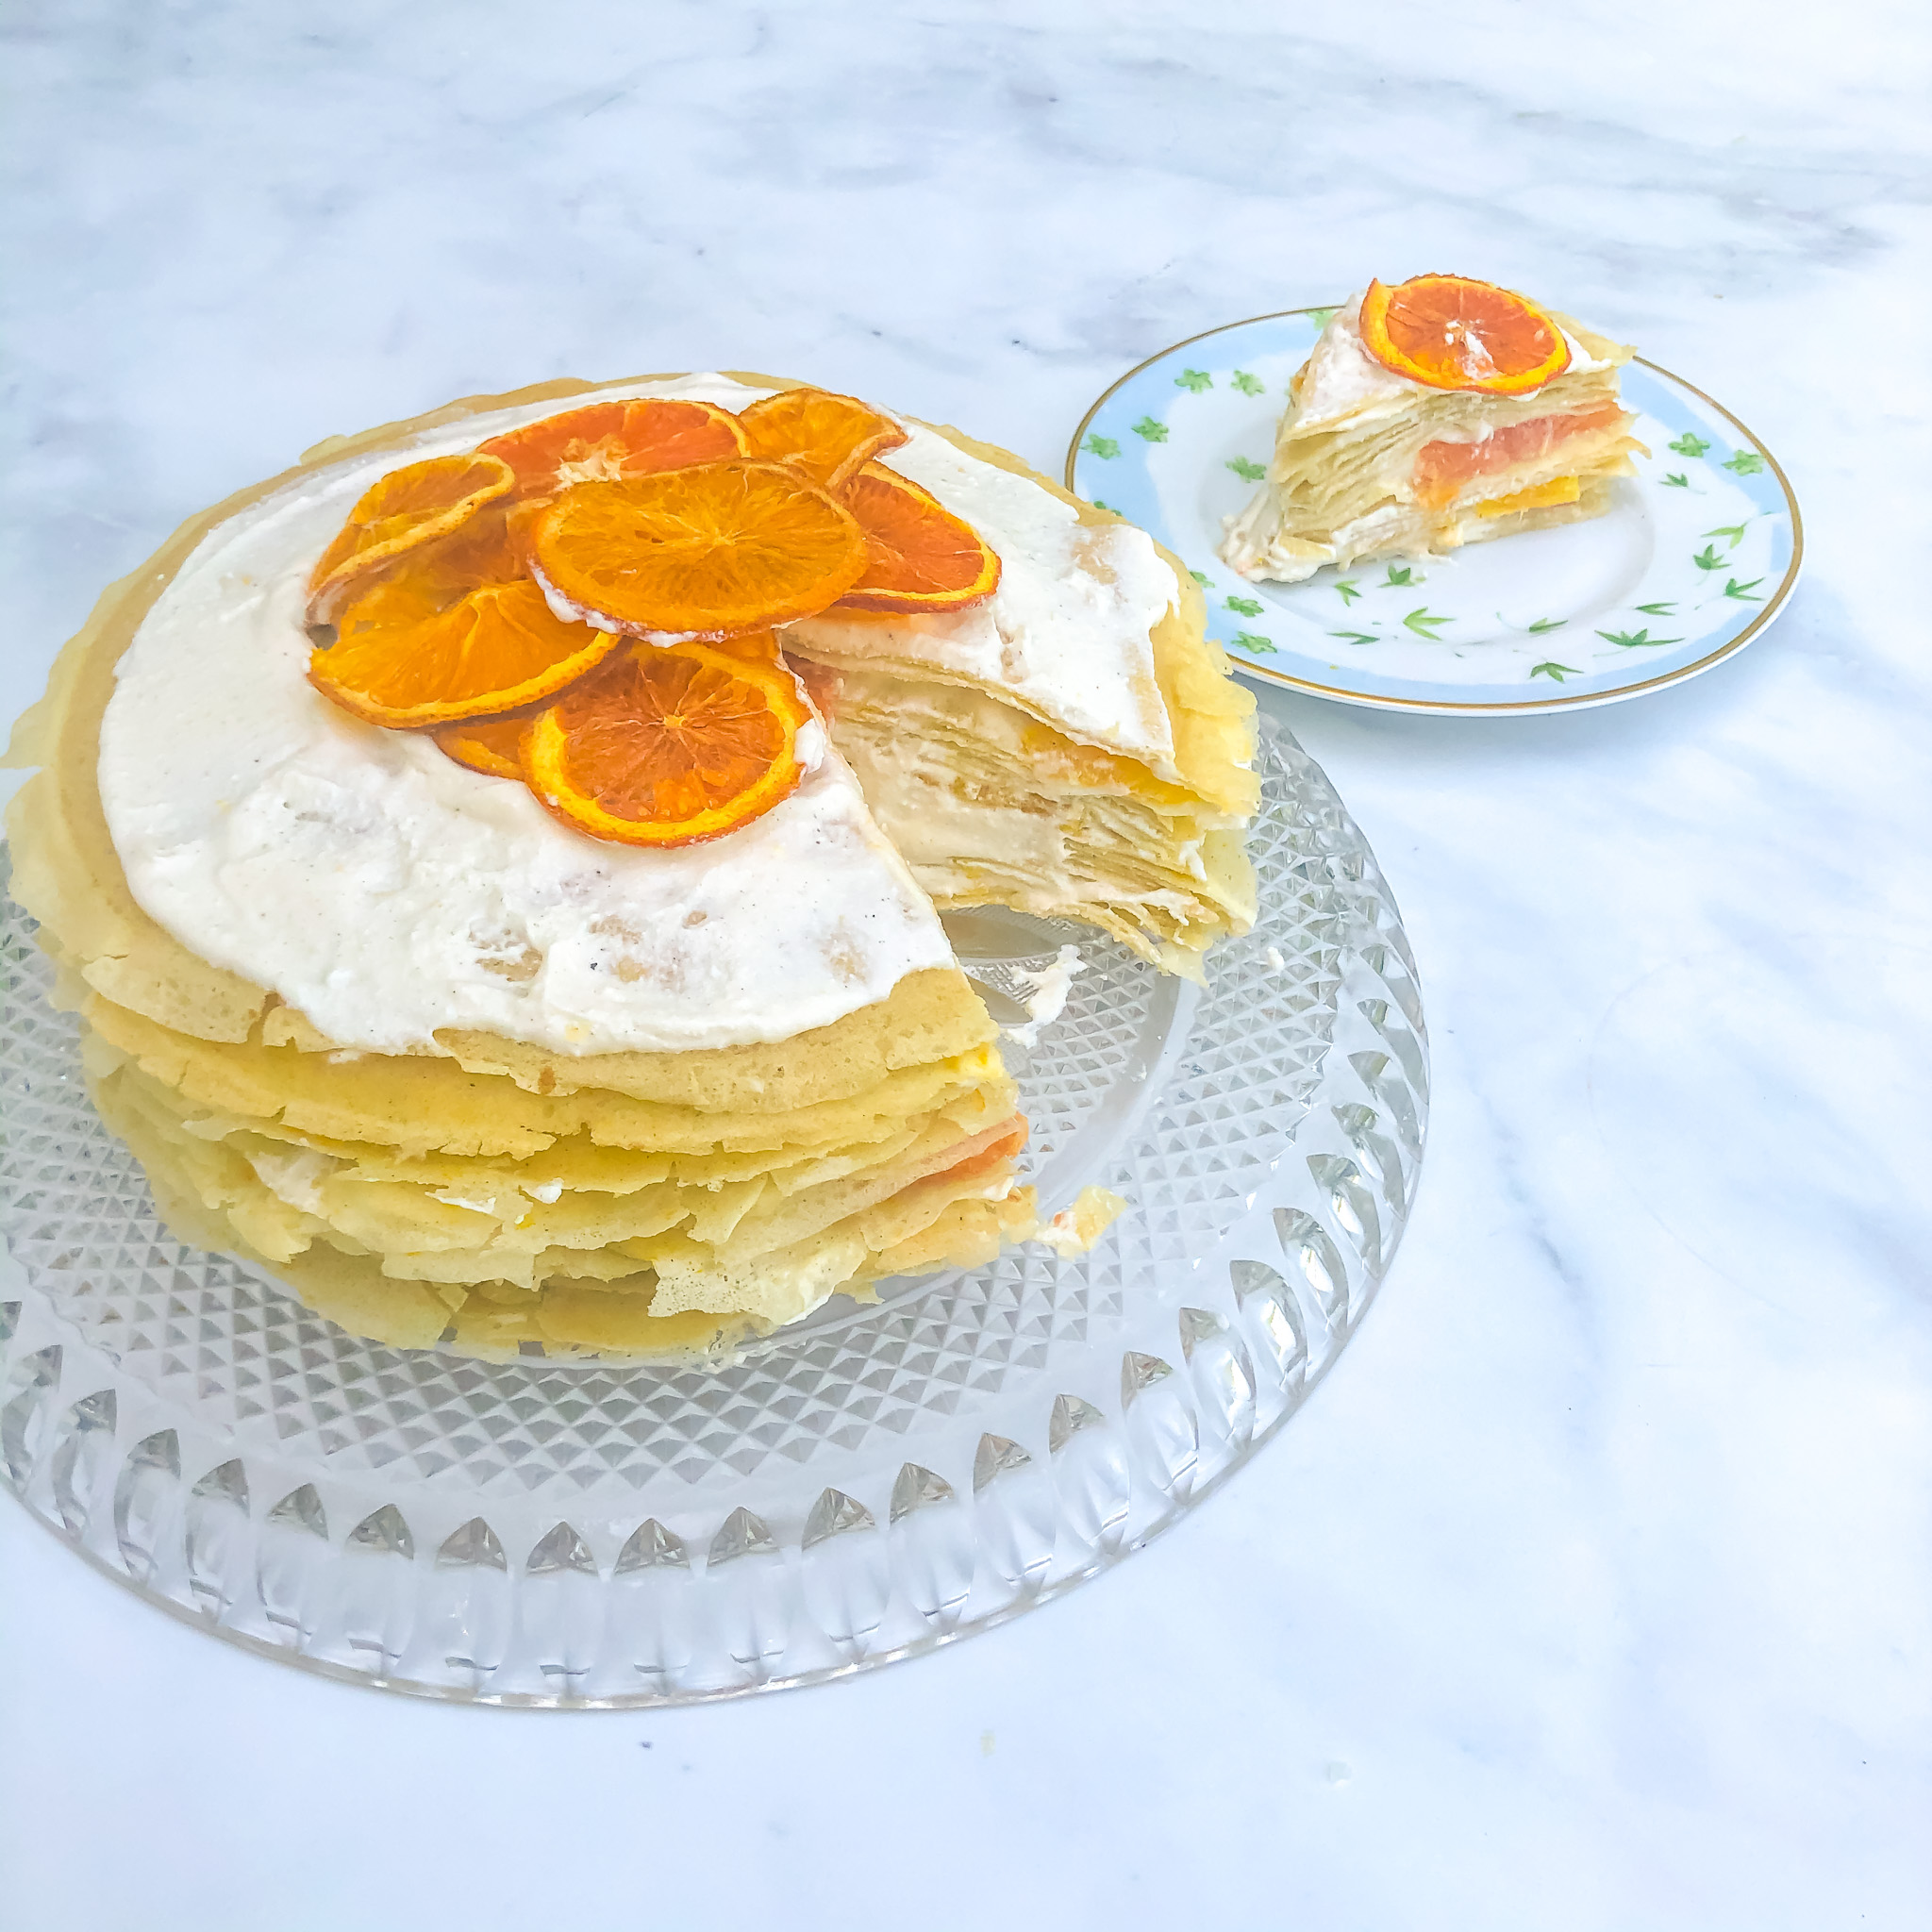 Finished cake and a slice of the summer citrus crepe cake with whipped ricotta and cardamom filling